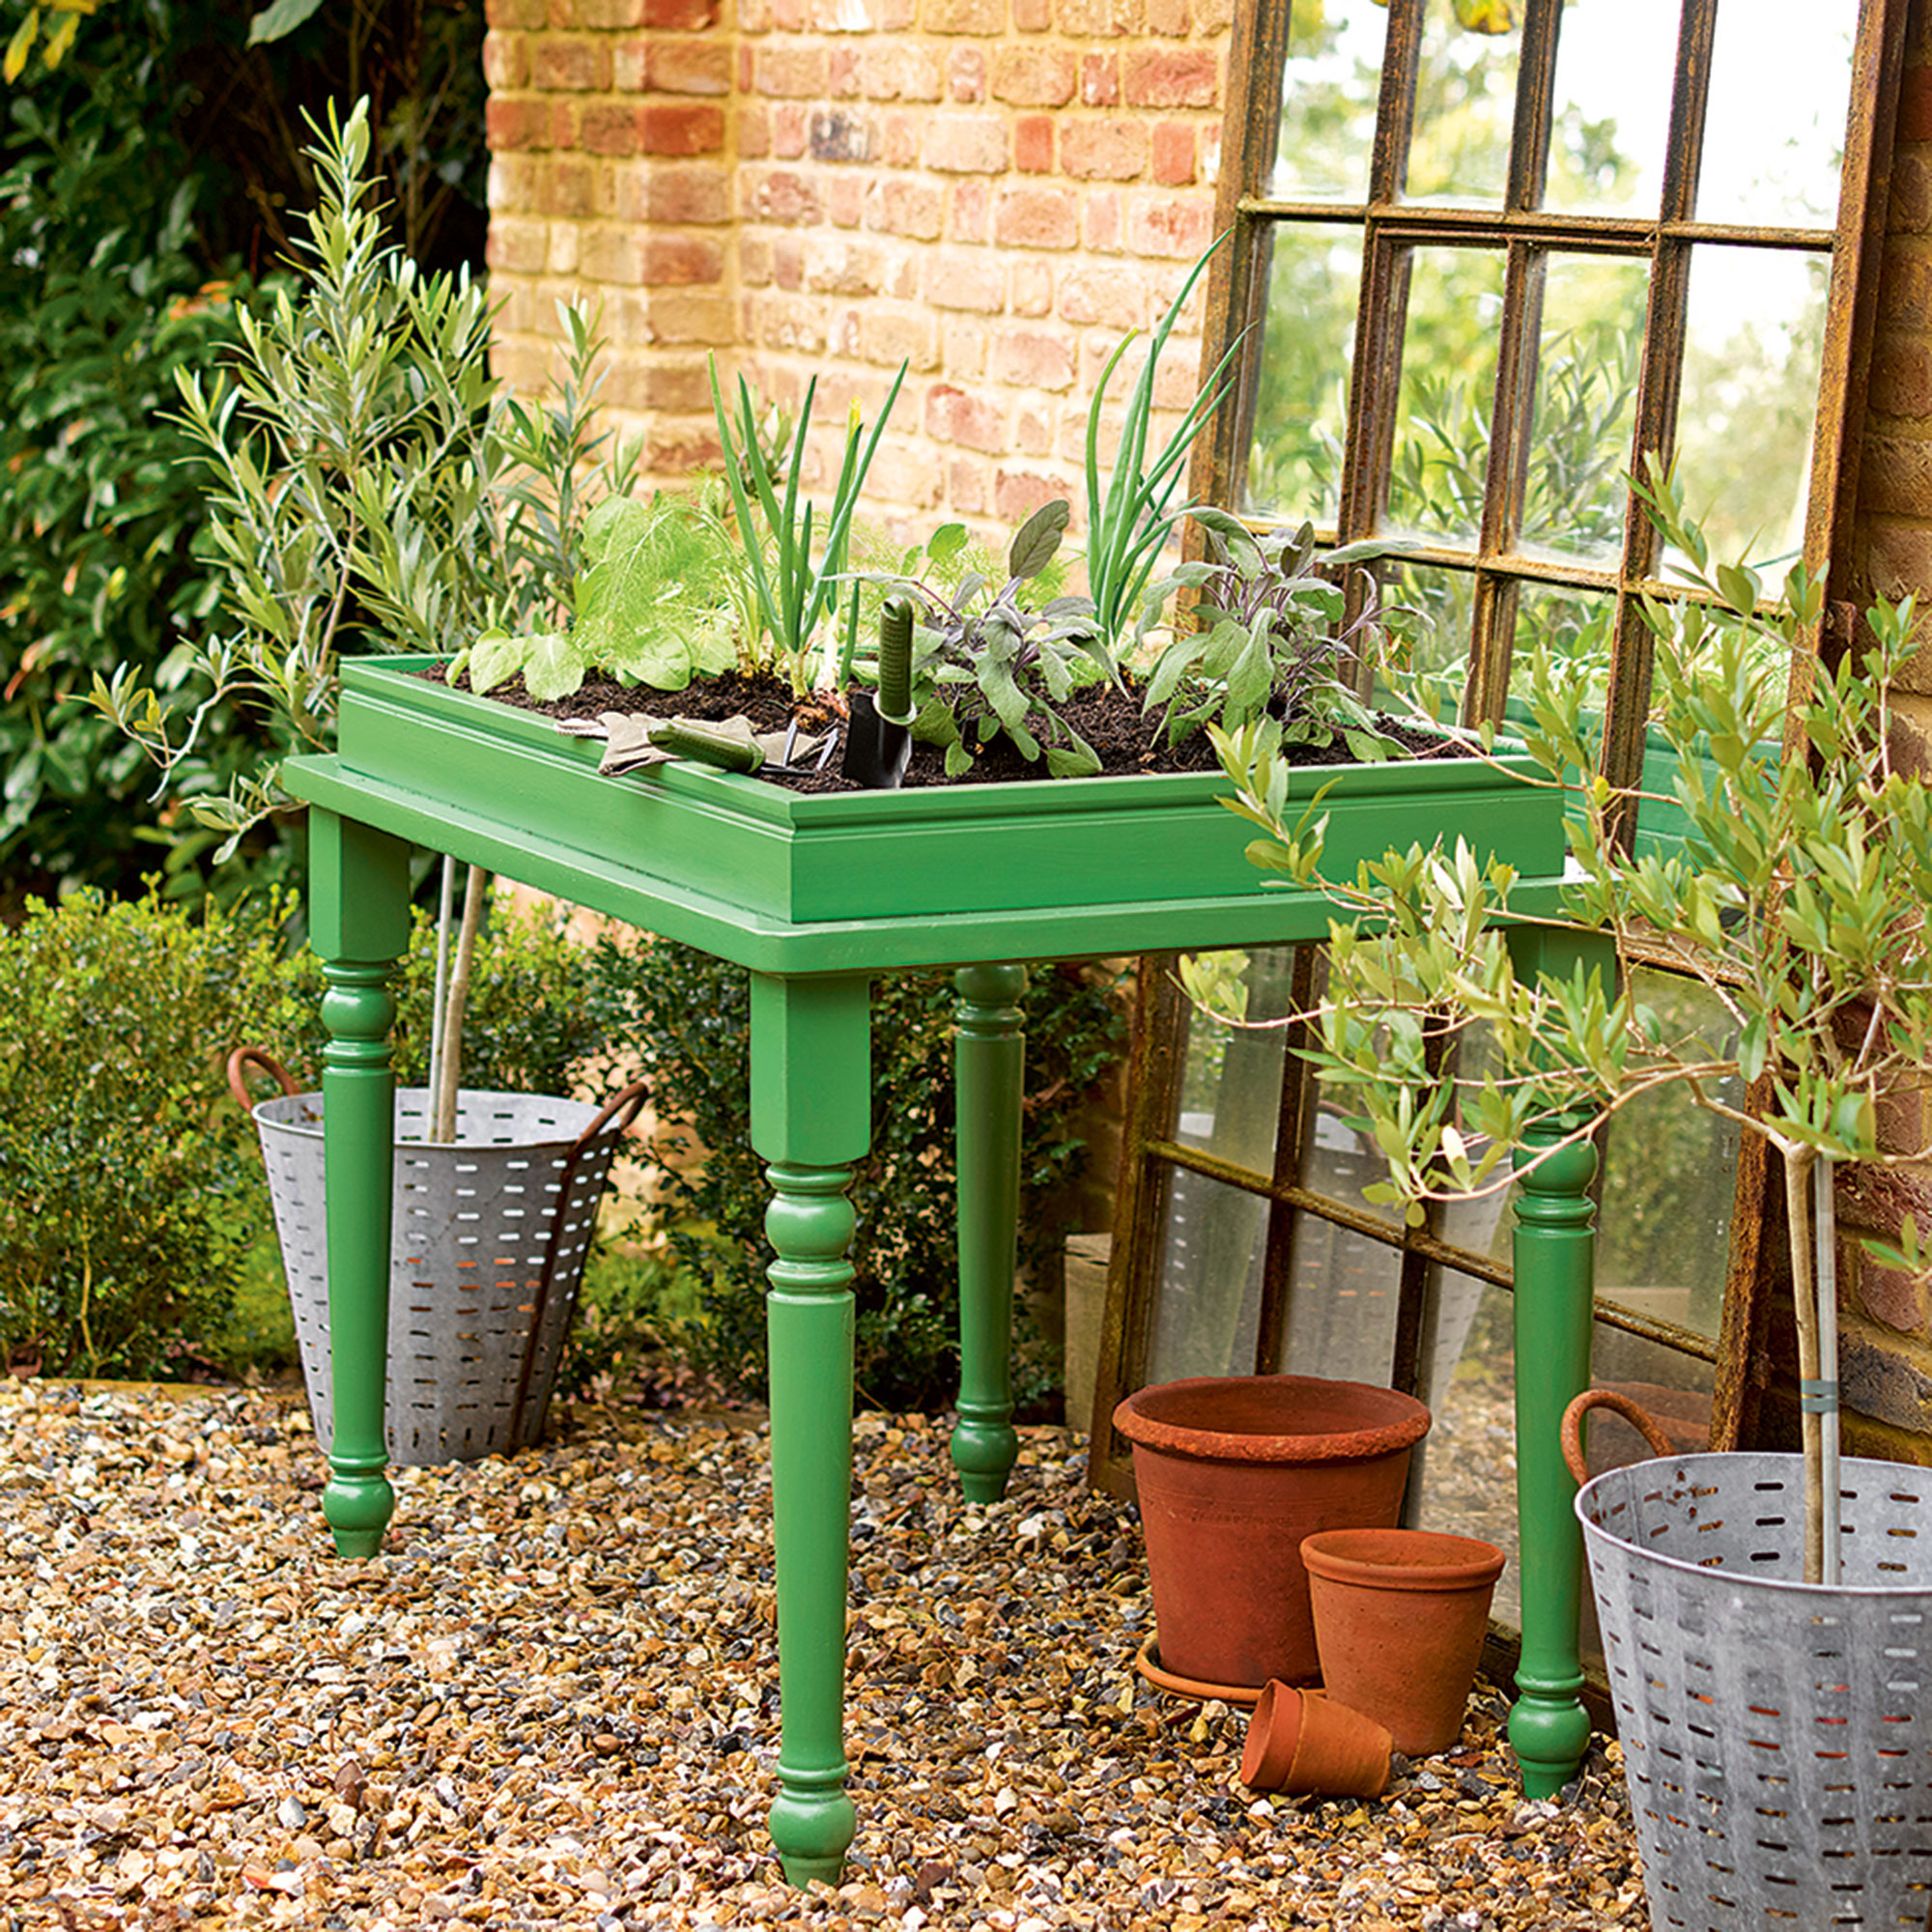 Upcycled green potting table on gravel area in garden